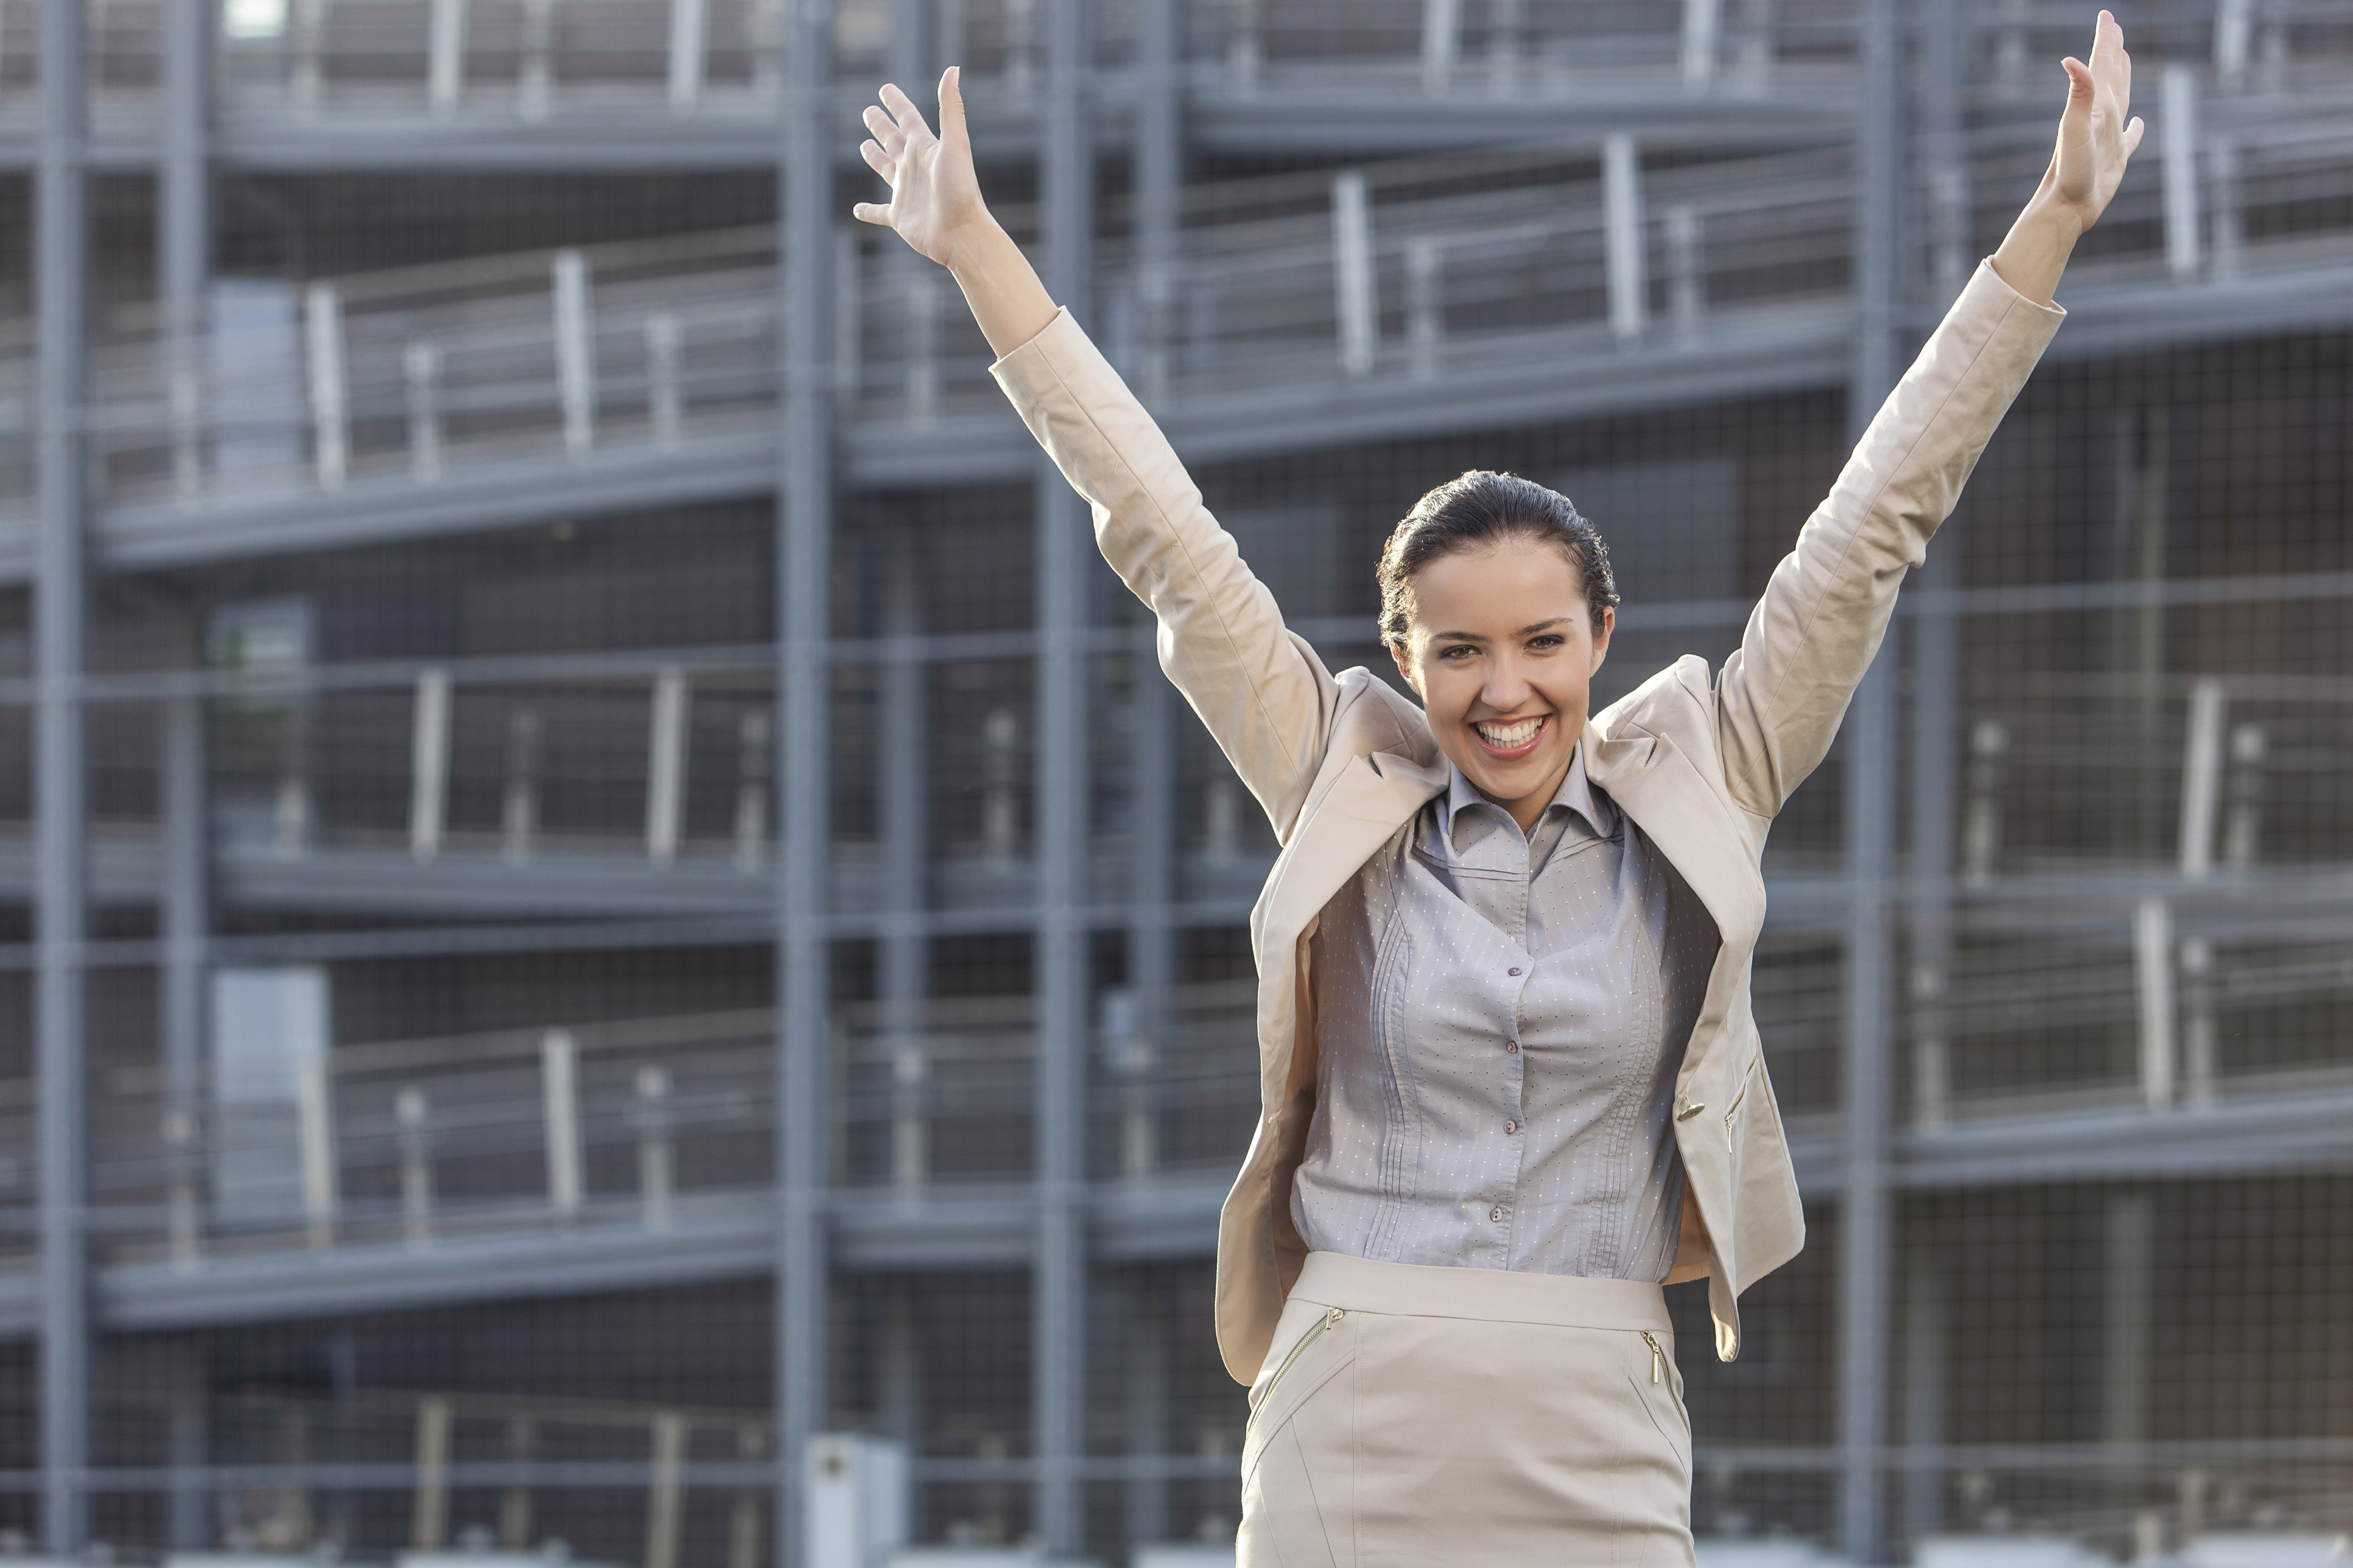 Excited young businesswoman with arms raised standing against office building